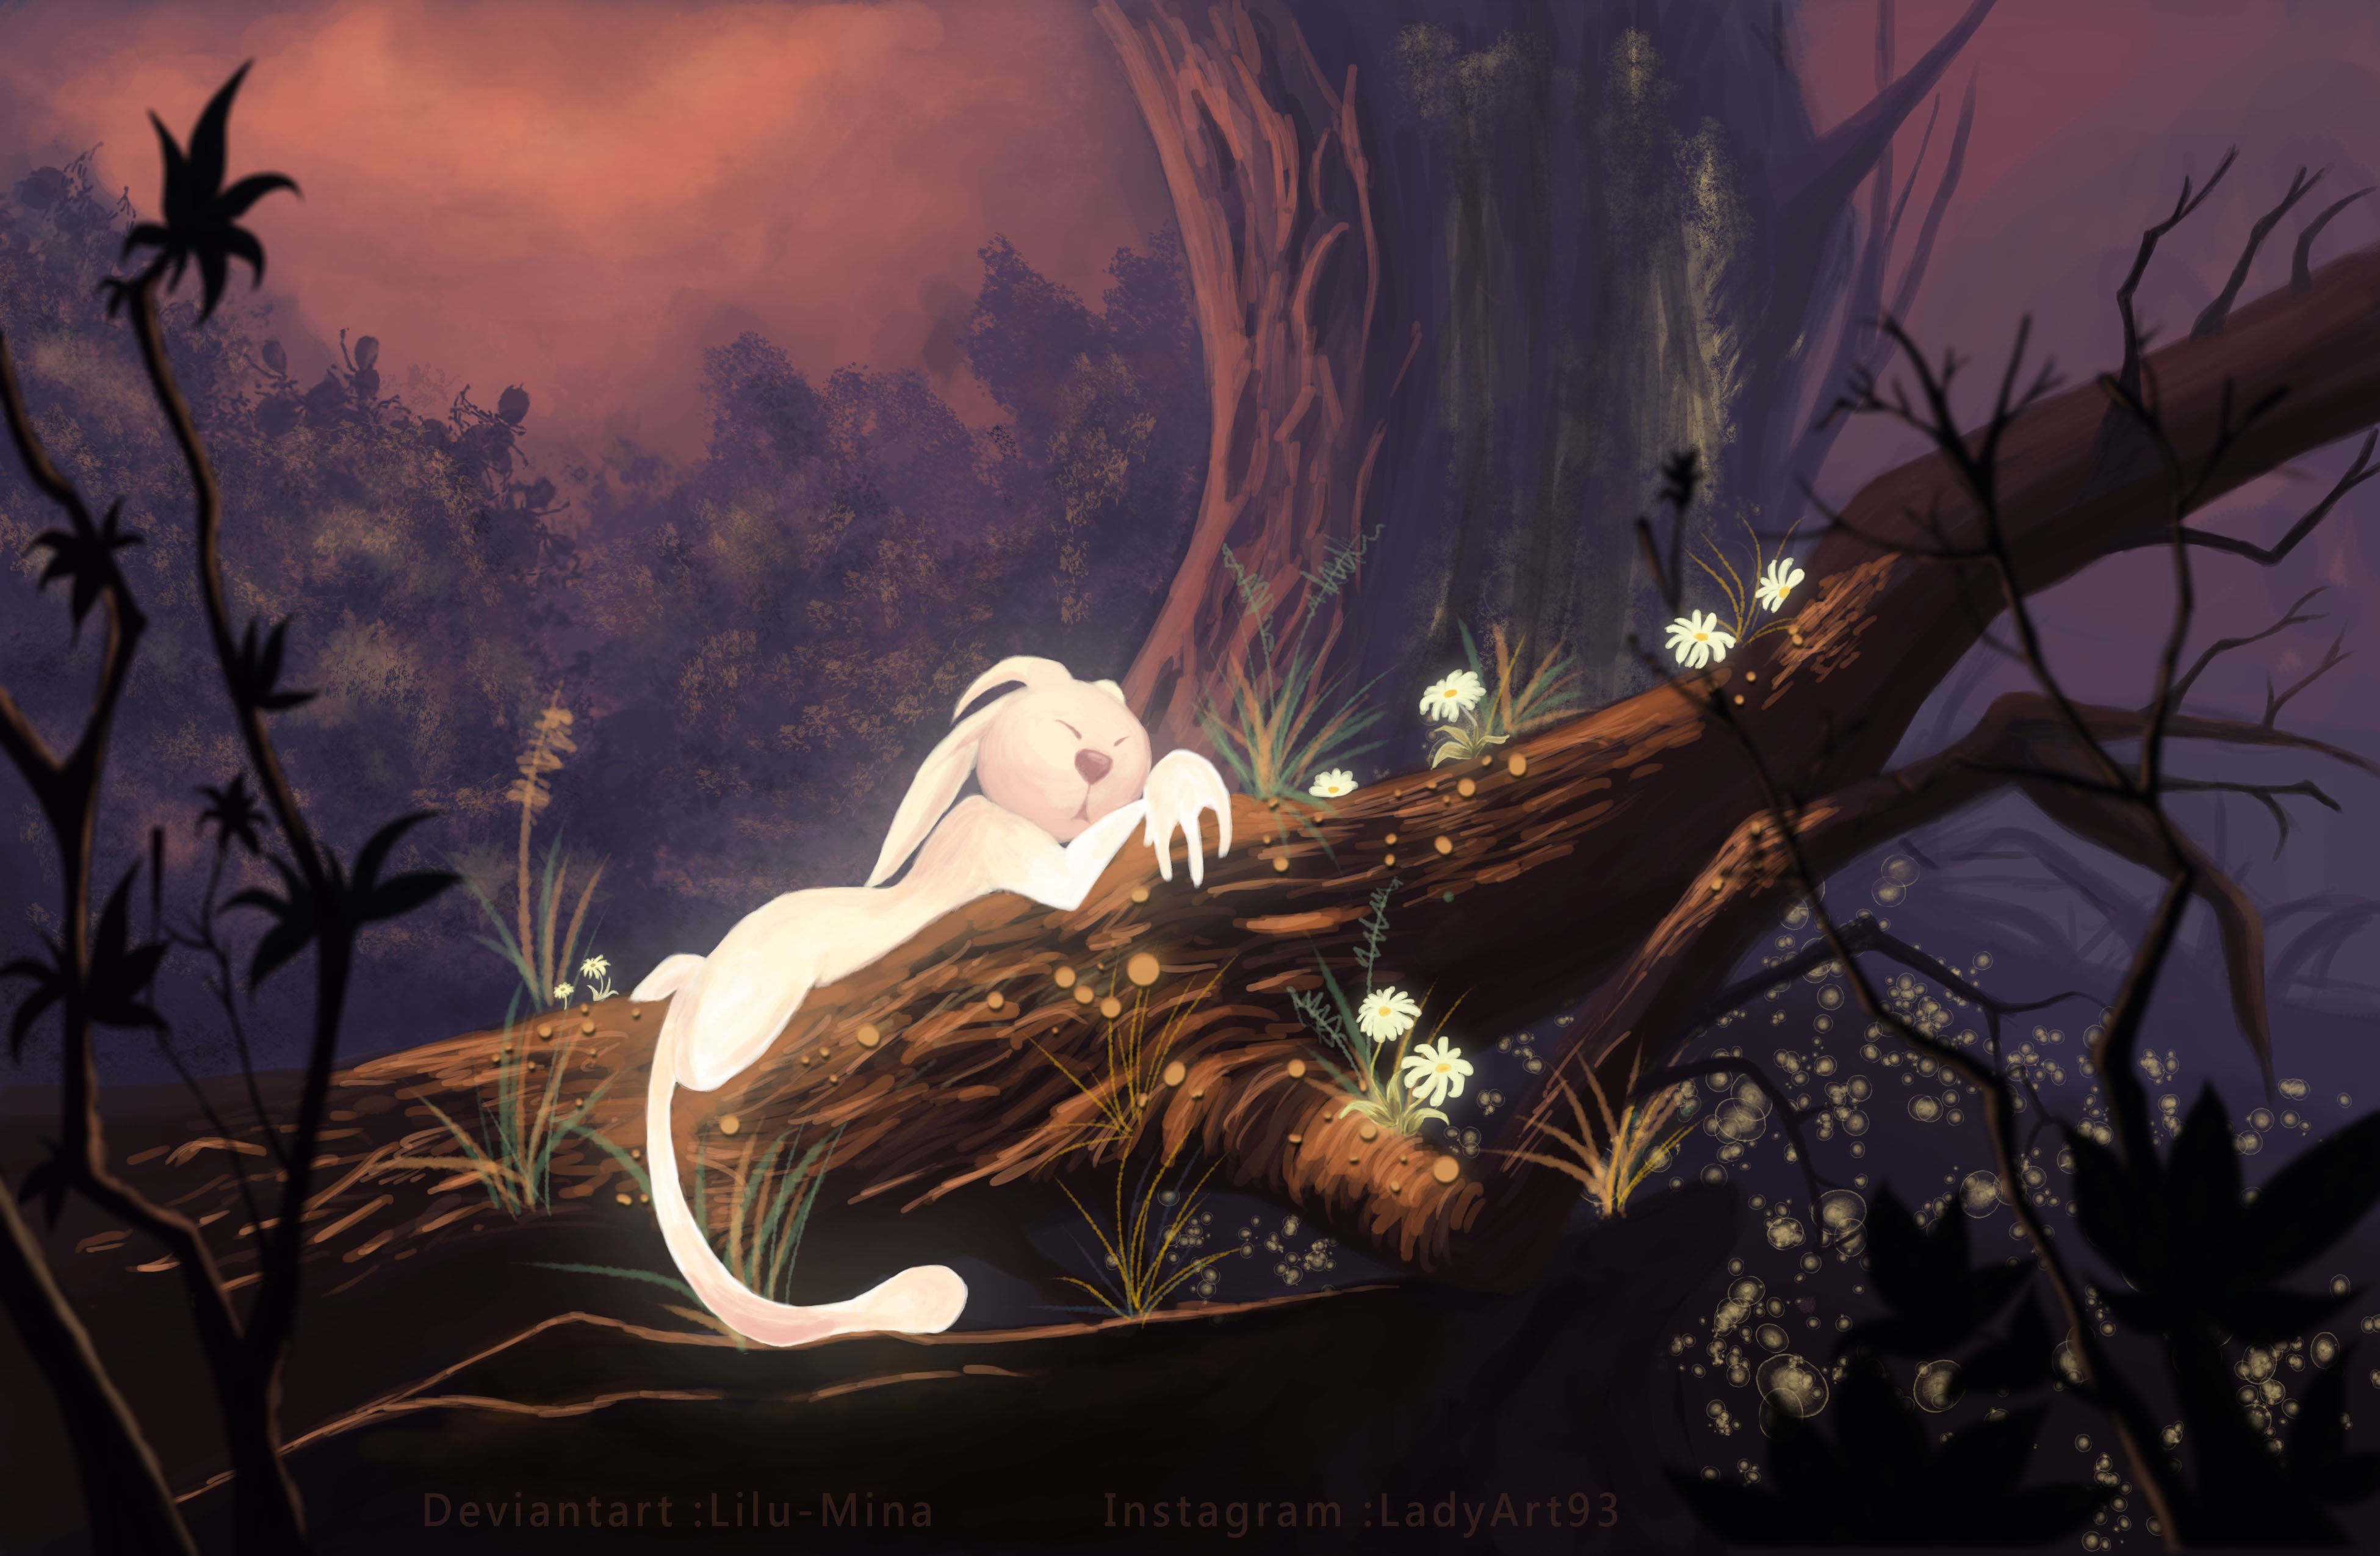 General 3900x2550 video games Ori and the Blind Forest video game art